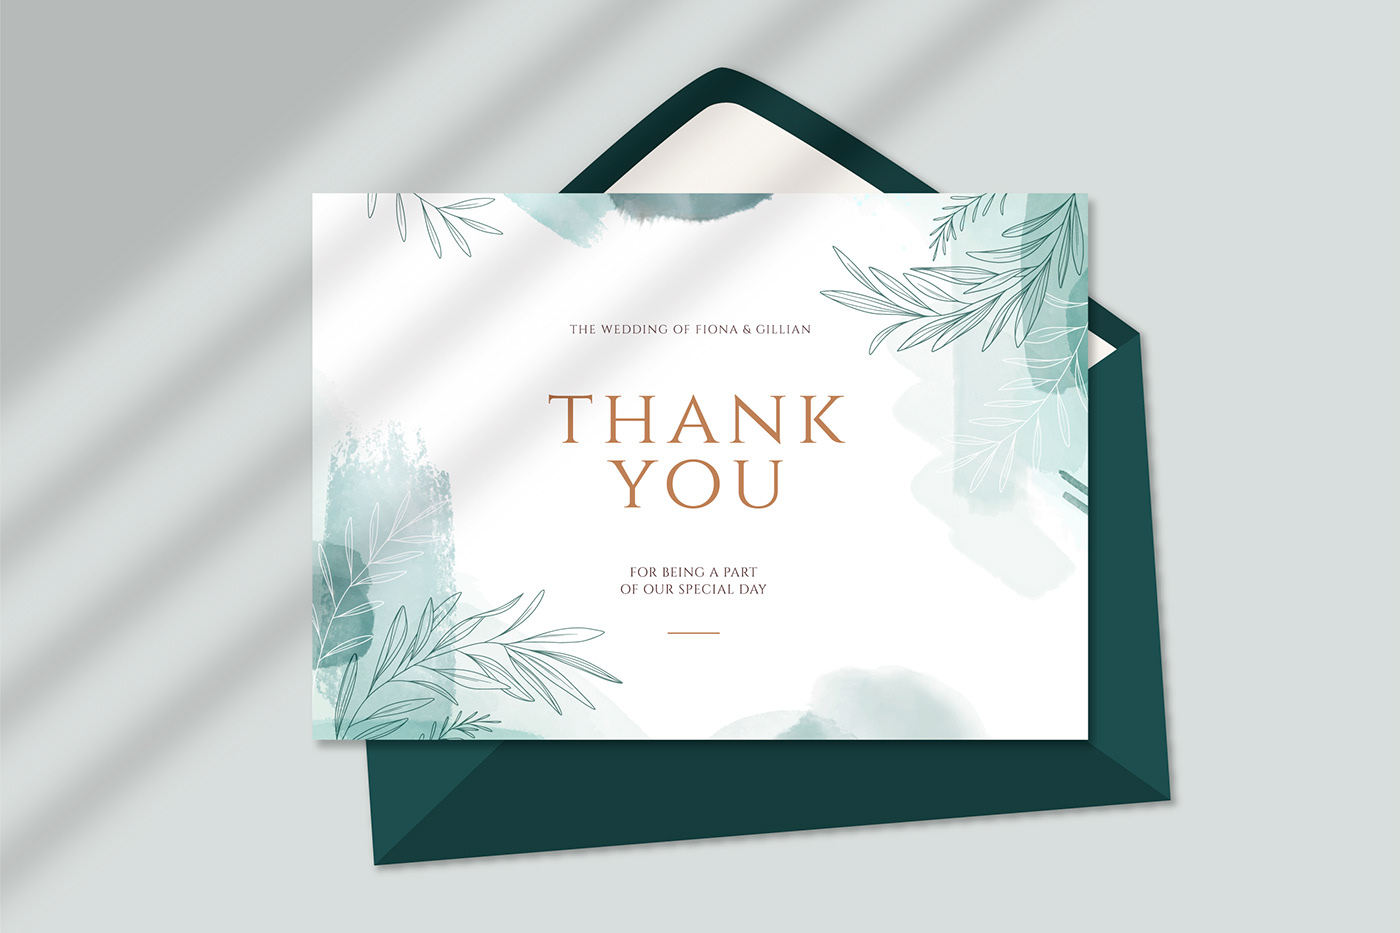 Invitation invite thank you card thank you card design wending